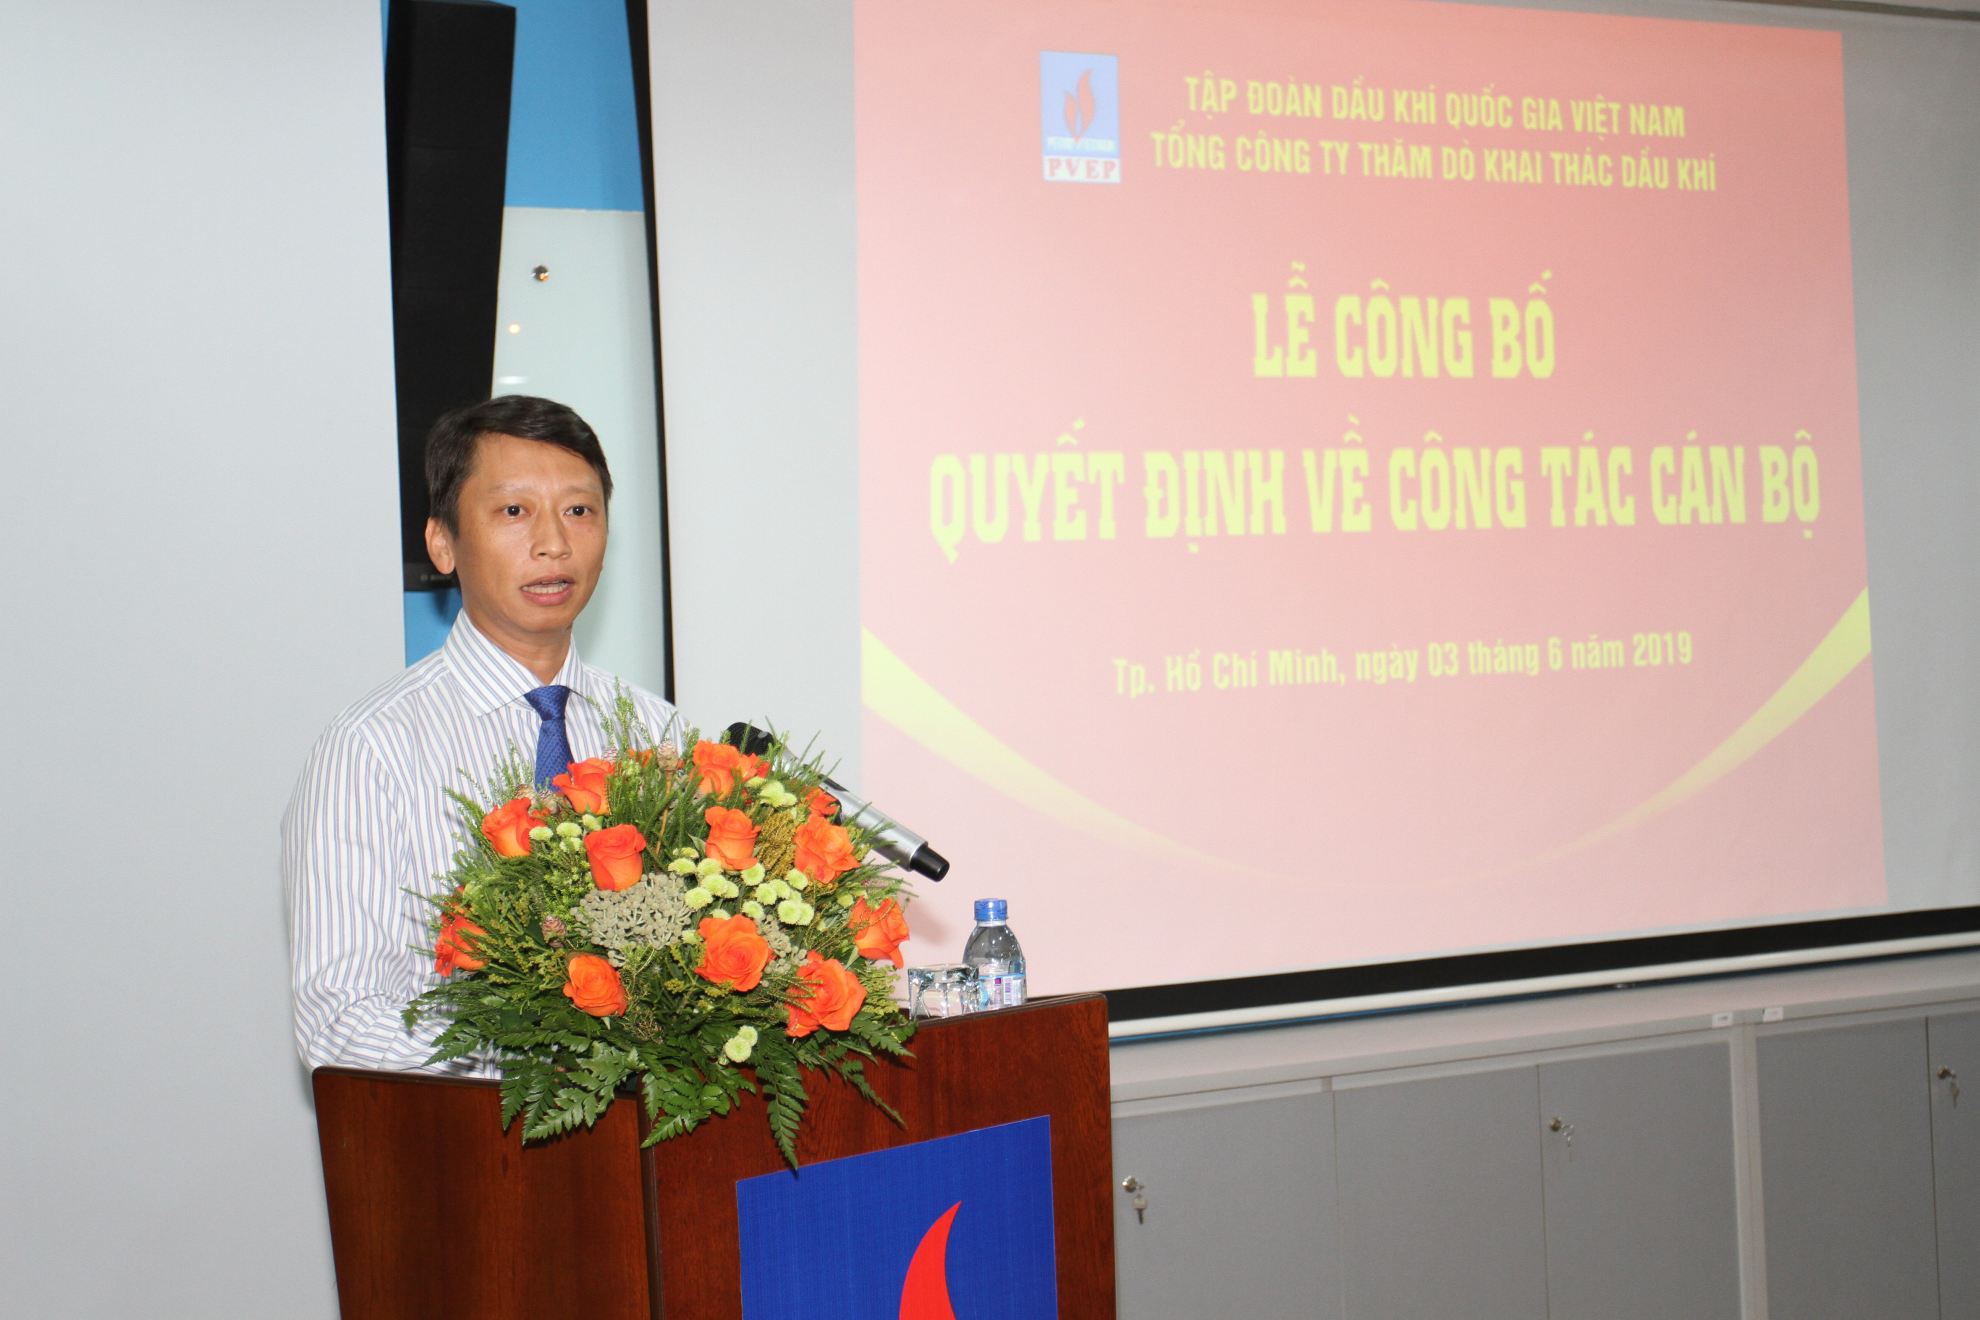 le cong bo quyet dinh ve cong tac can bo cua pvep